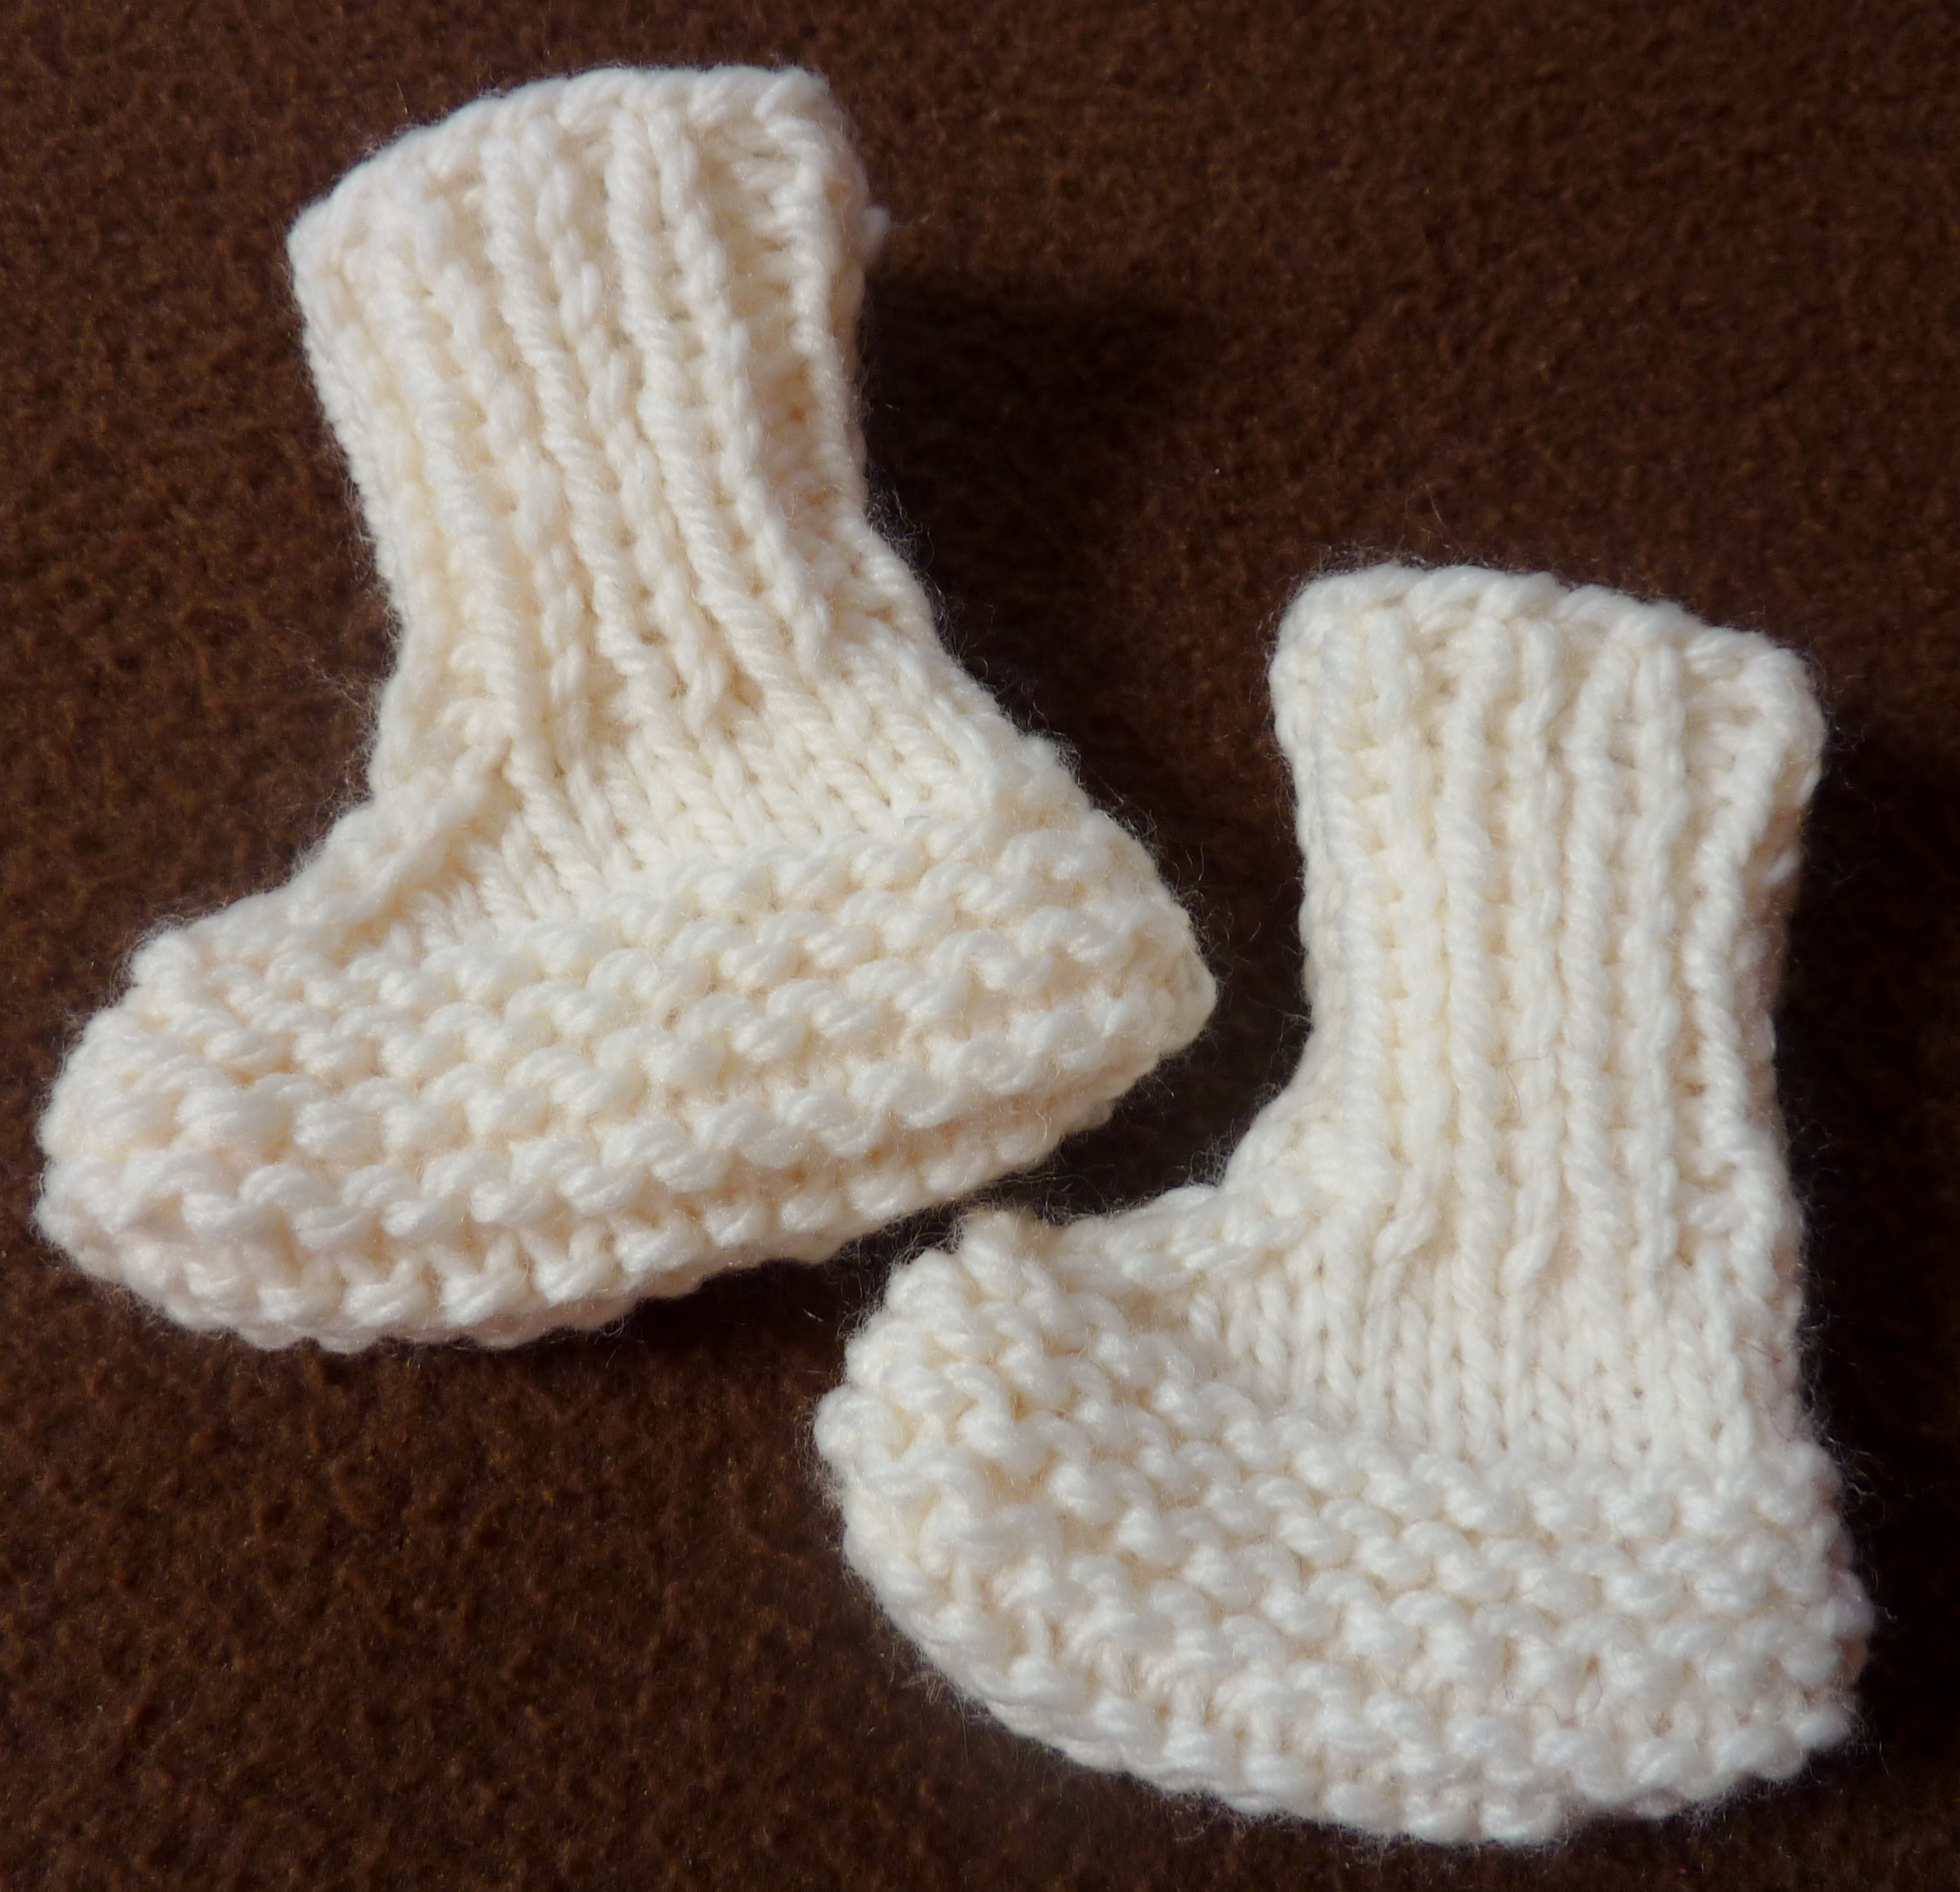 Free Knitting Pattern Baby Booties 4 Ply The Purple And White Knitting Initiative For Irish Premature Babies